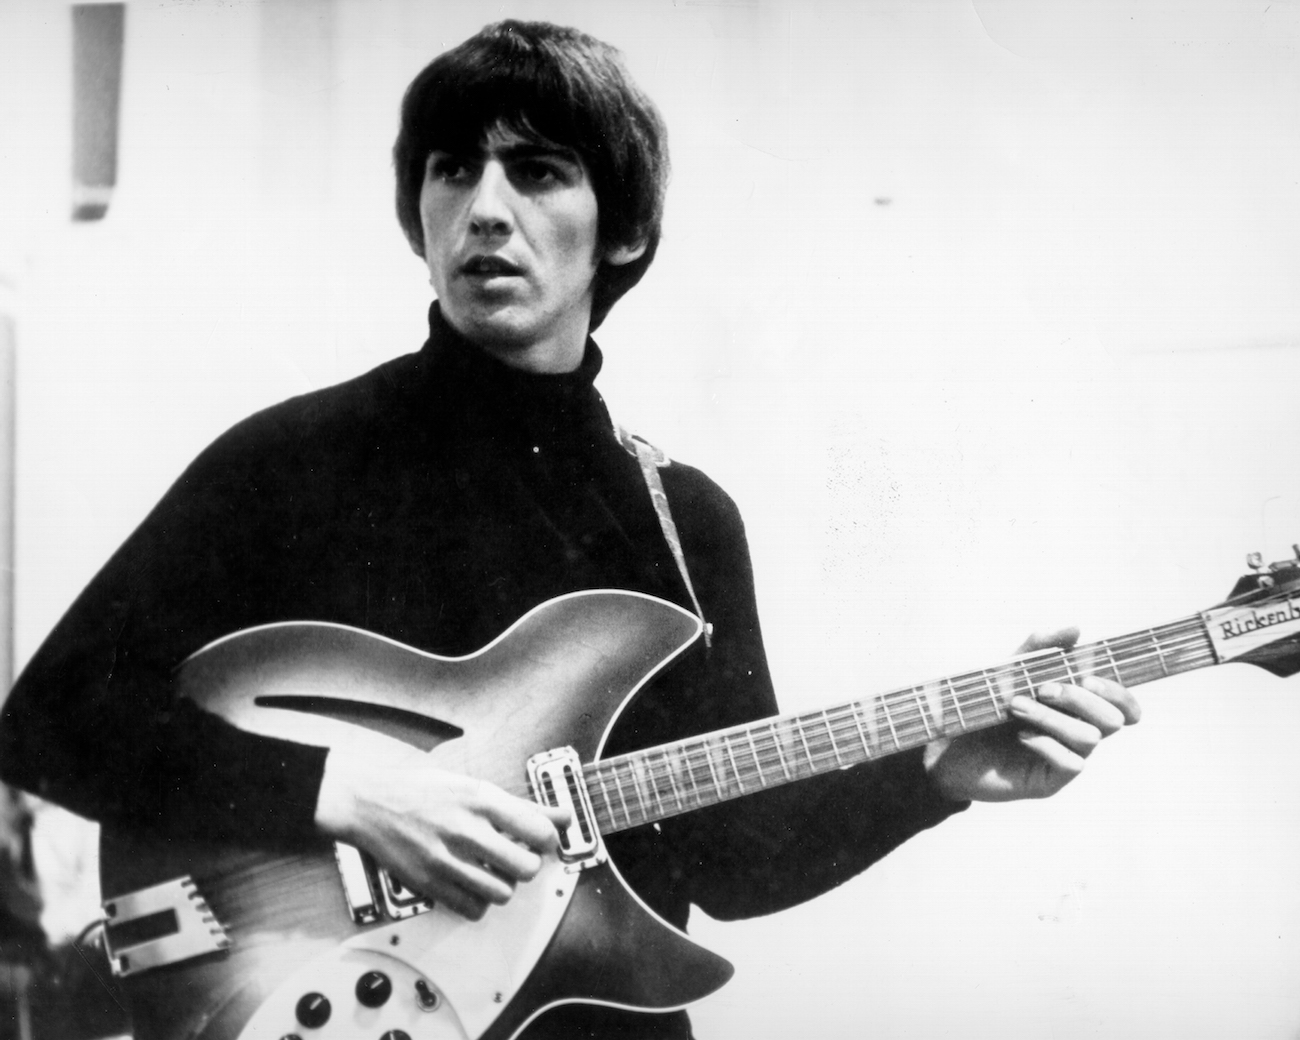 George Harrison Didn’t Know Why Elvis Presley Didn’t Make More Music Like He Used To